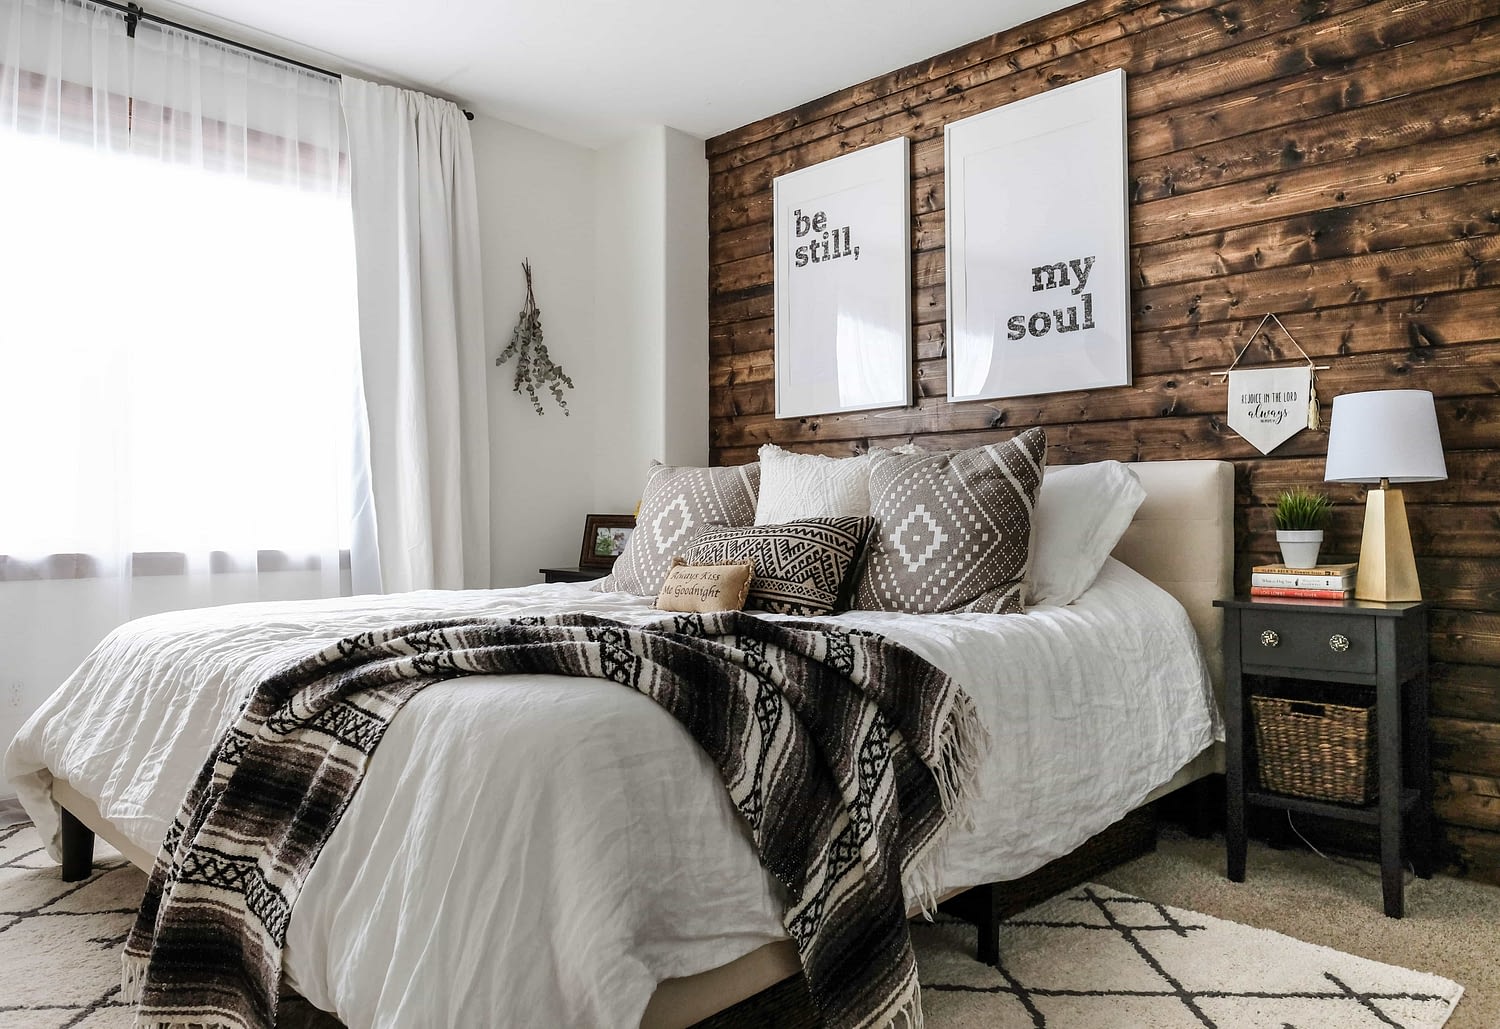 A Modern Rustic Bedroom | See how to blend two styles to create a modern rustic bedroom that is oh so cozy | Joyfully Growing Blog